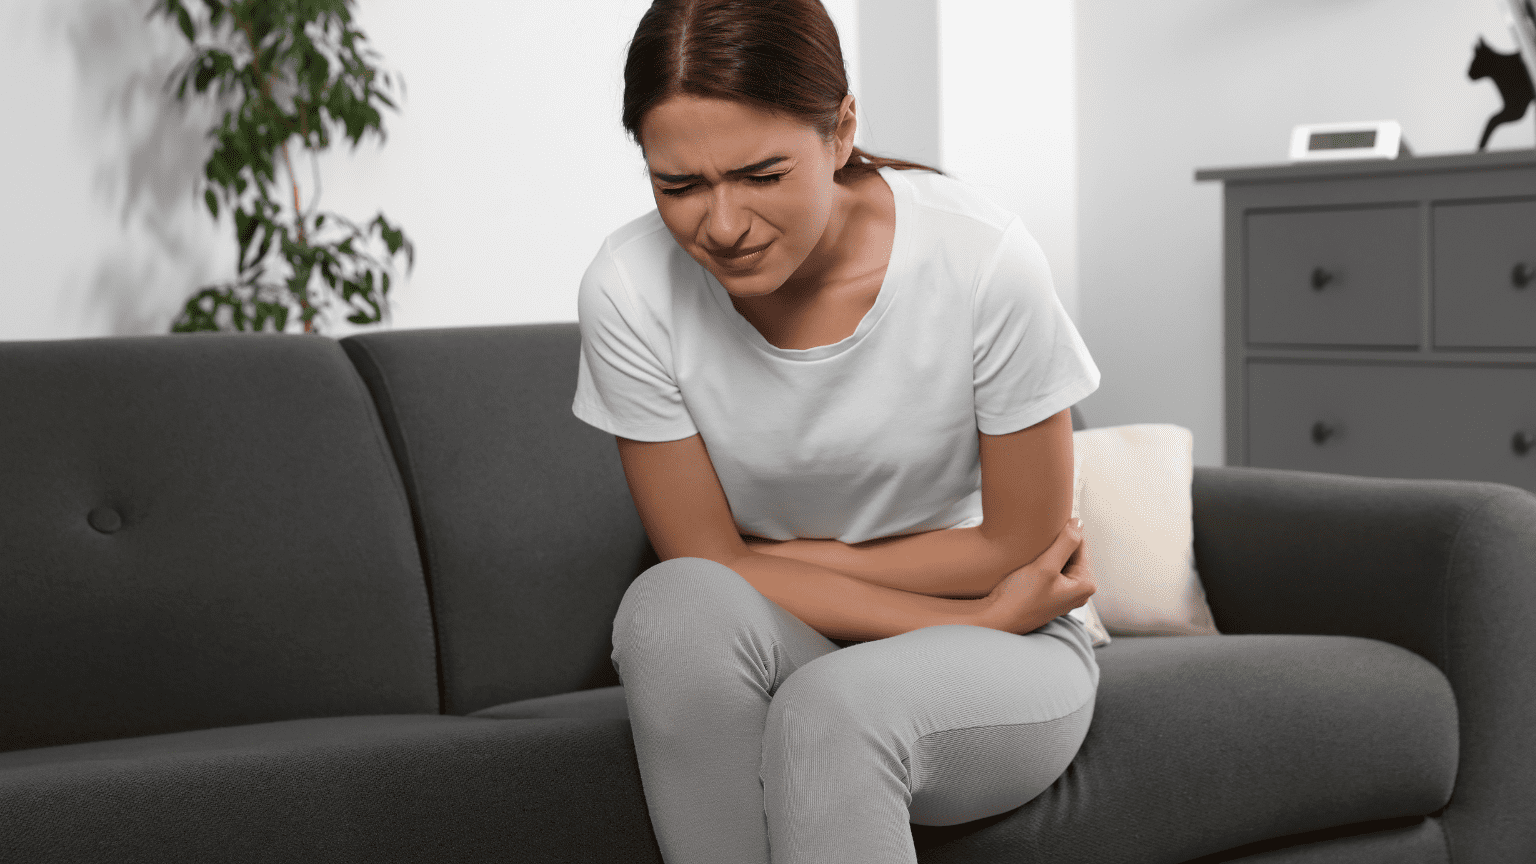 What Are the Types of Cystitis?